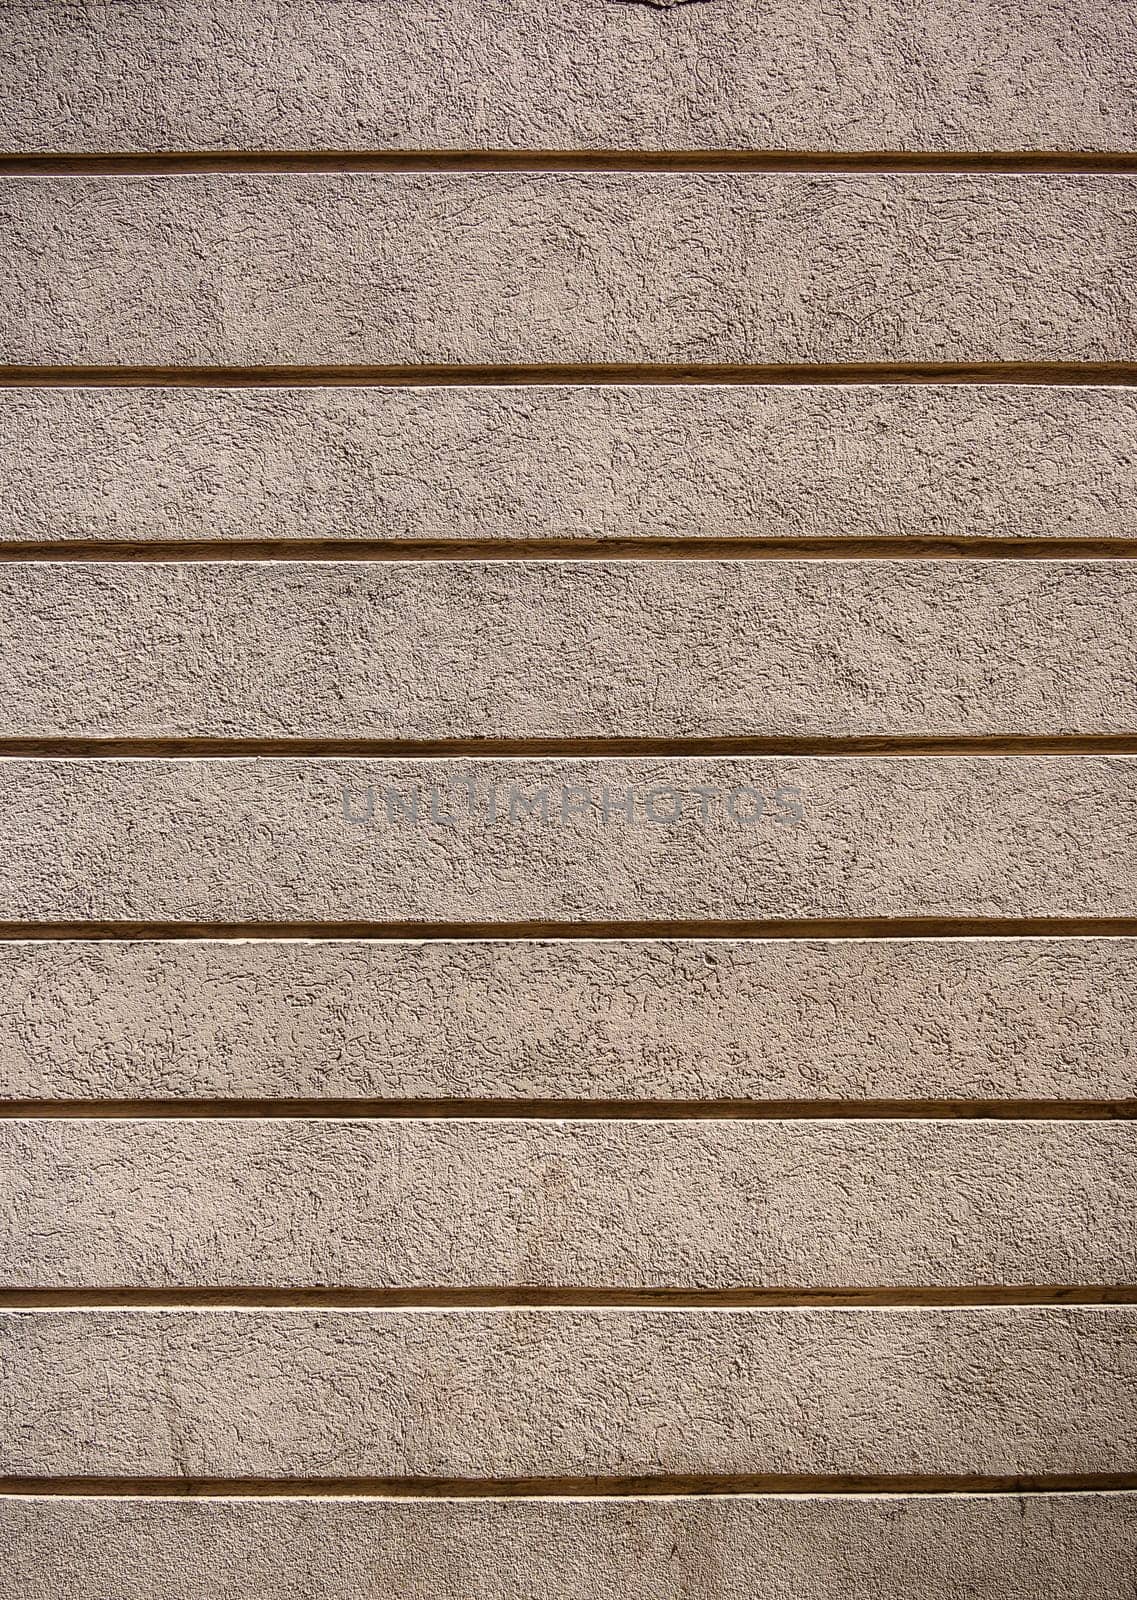 Beautiful exterior wall of a renovated house painted with a soft light color, enriched with a geometric horizontal striped texture. This design adds a contemporary and elegant touch by Mixa74